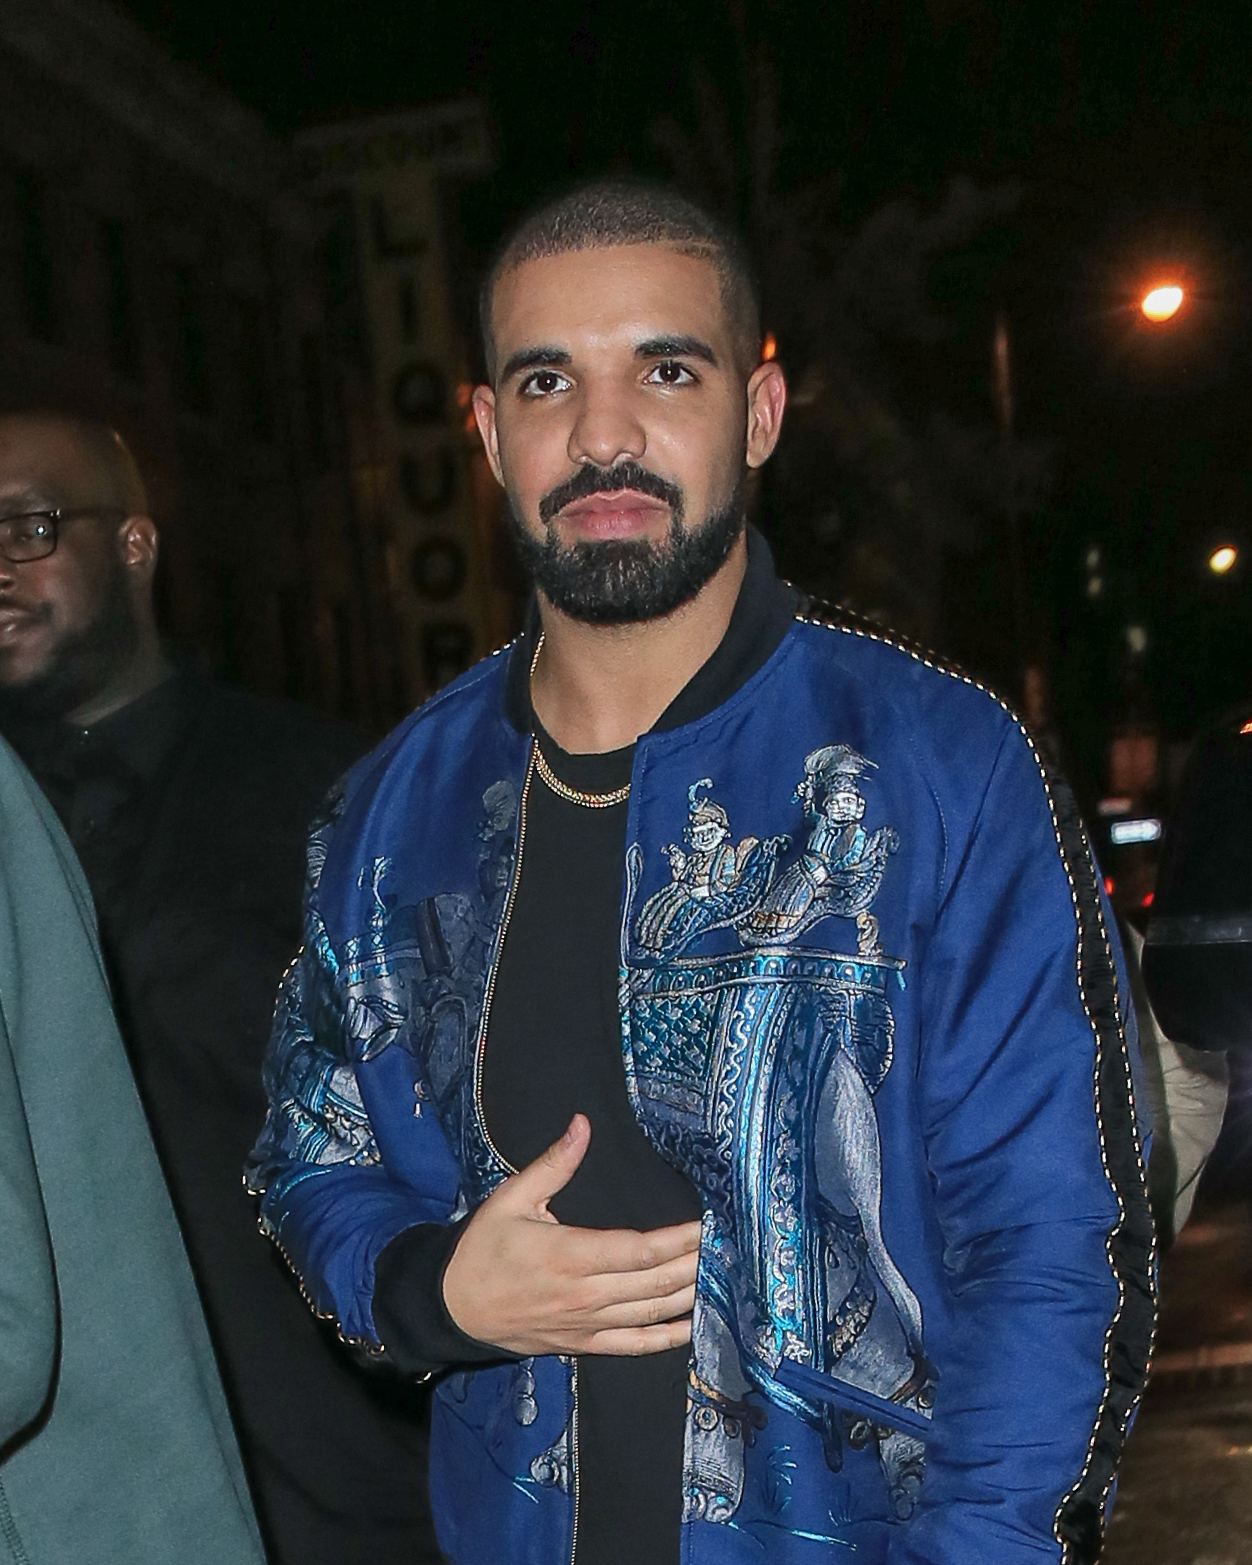 Drake Associated With Ex-Kanye West Collaborator Amid “Mob Ties” Reference Leak #KanyeWest